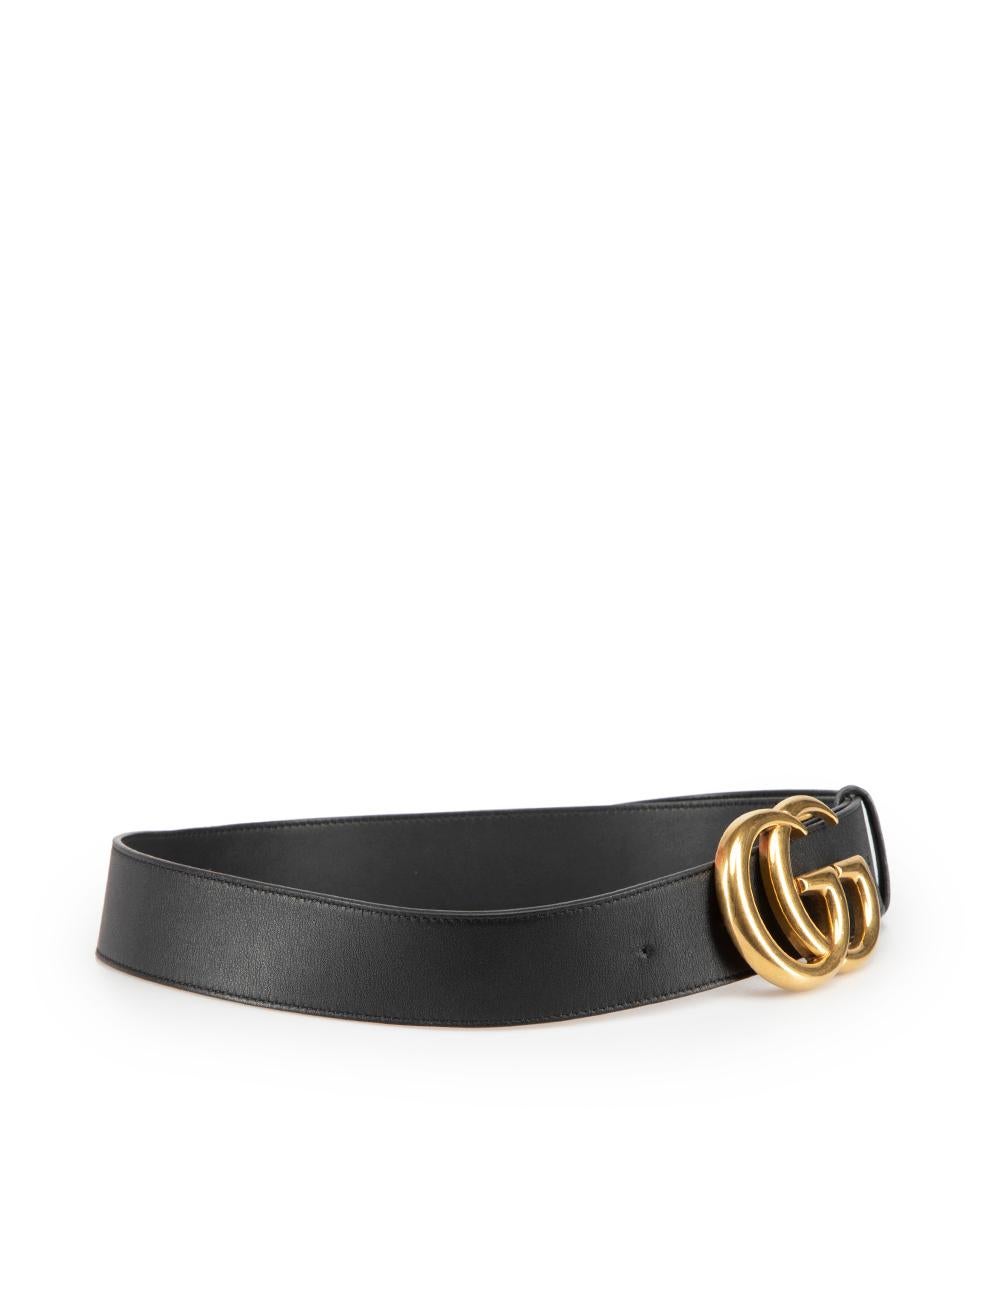 CONDITION is Very good. Minimal wear to belt is evident. Minimal wear to leather with hardly any creasing or scuffing found, very slight tarnishing of the buckle seen on this used Gucci designer resale item. Please note that an extra hole has been